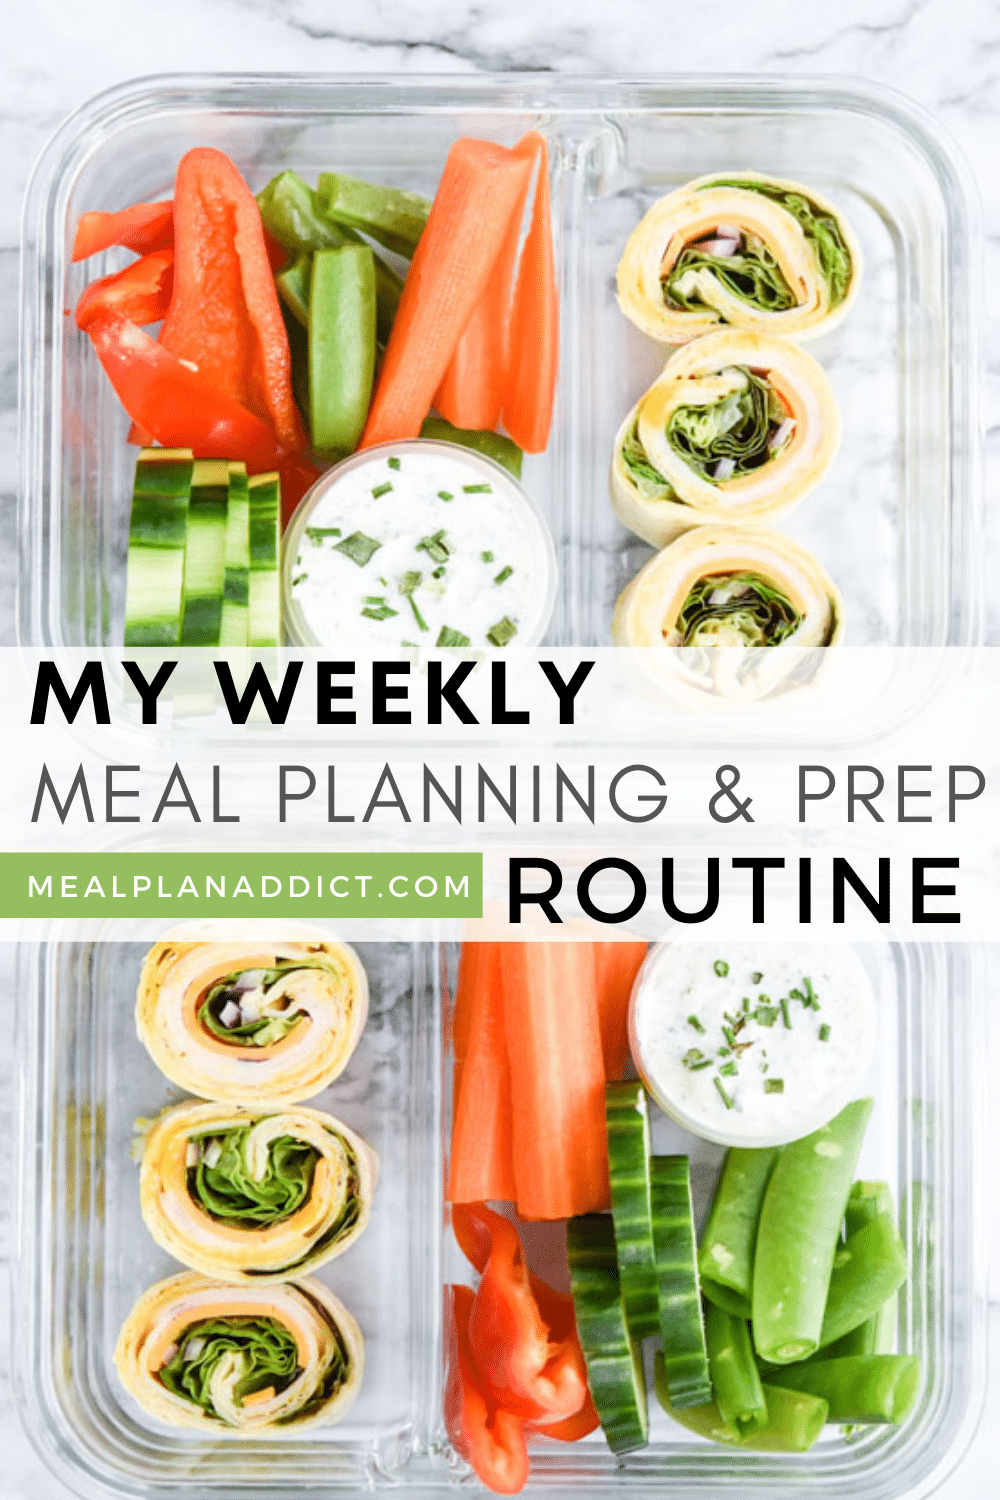 My Weekly Meal Planning and Prep Routine